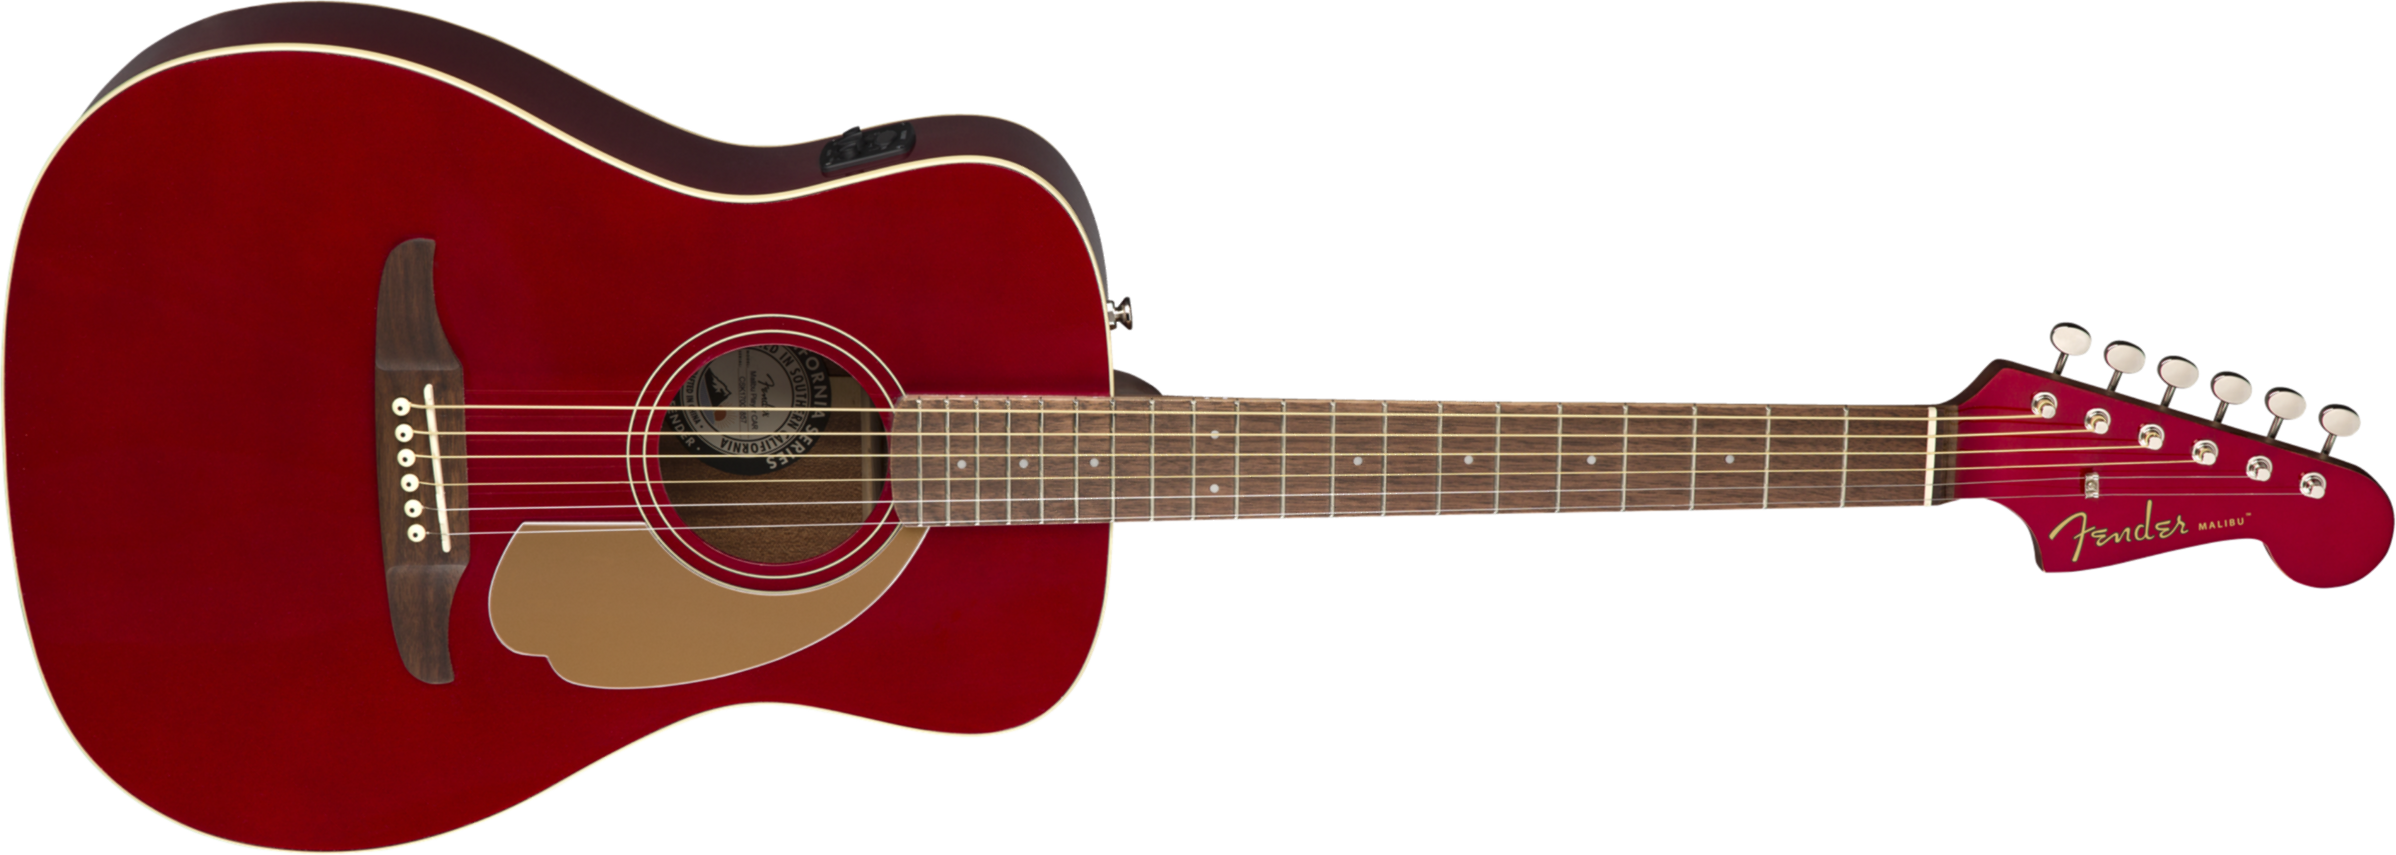 Fender Malibu Player - Candy Apple Red - Acoustic guitar & electro - Main picture